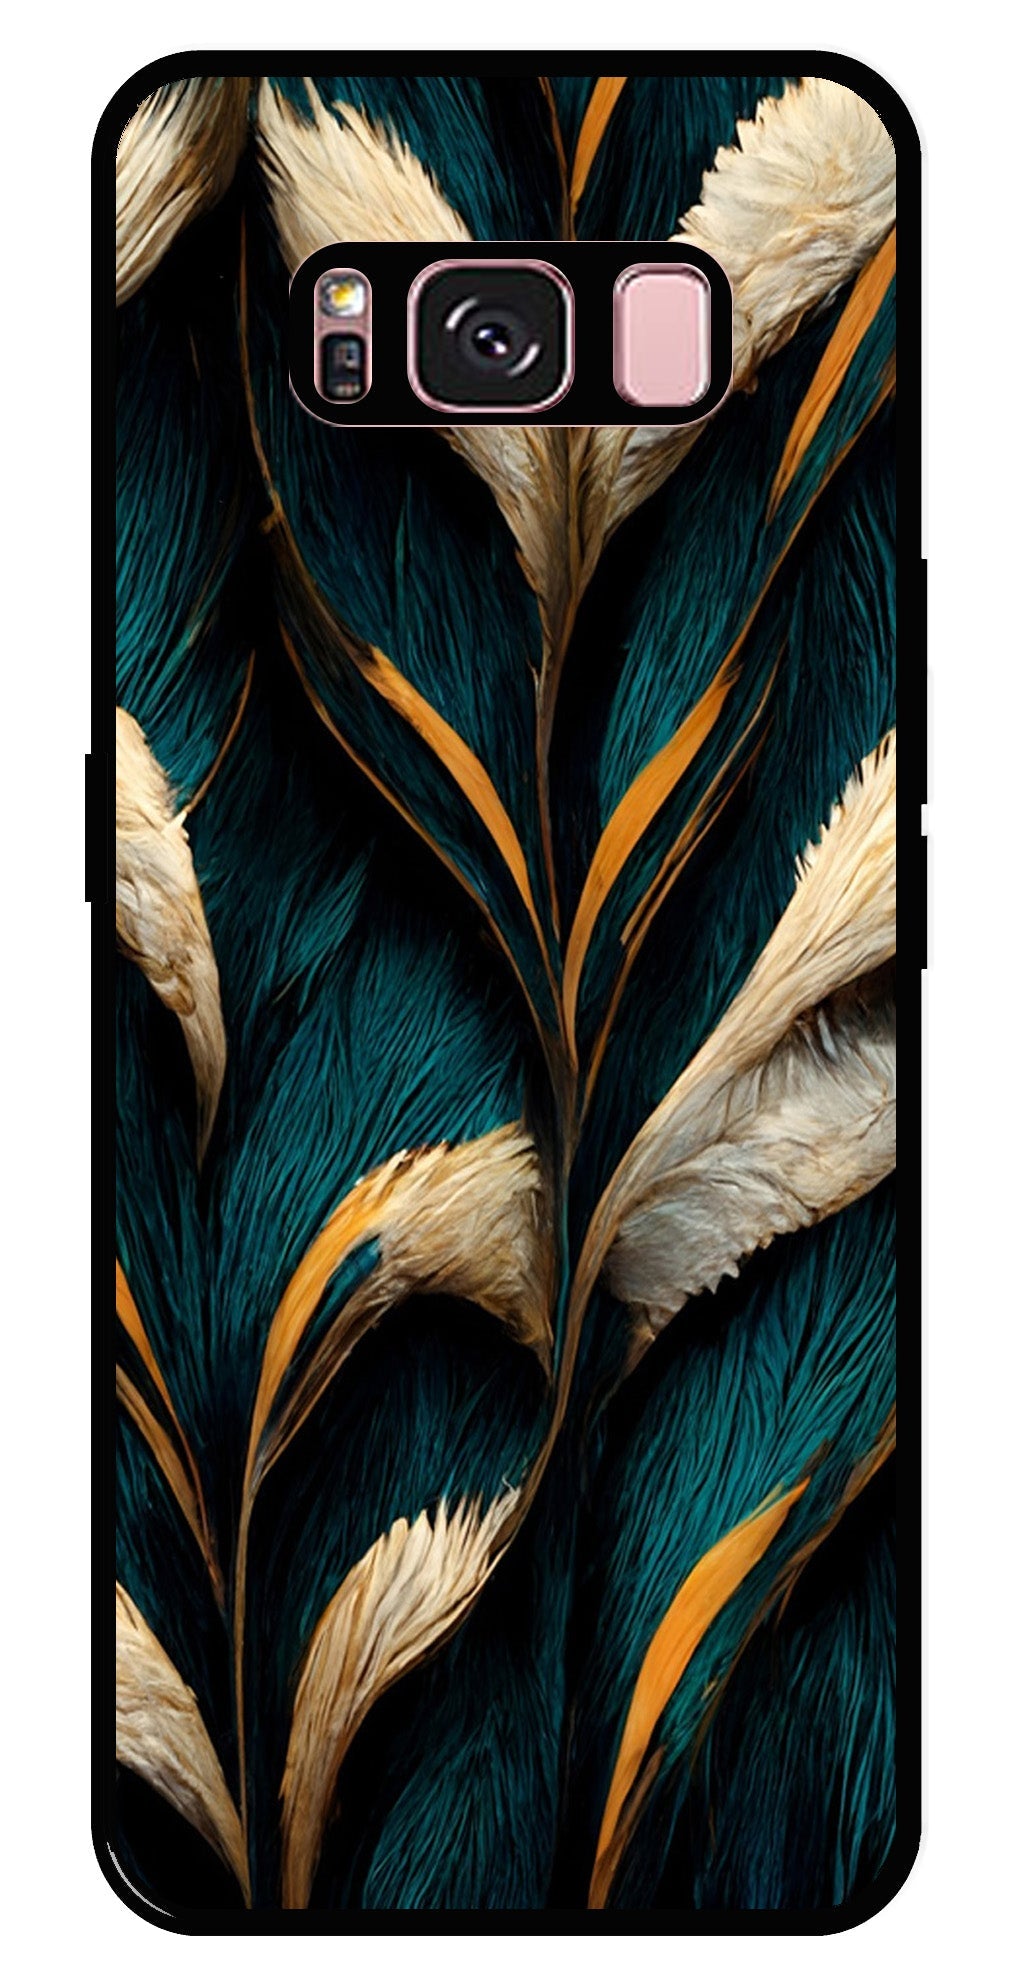 Feathers Metal Mobile Case for Samsung Galaxy S8 Plus   (Design No -30)